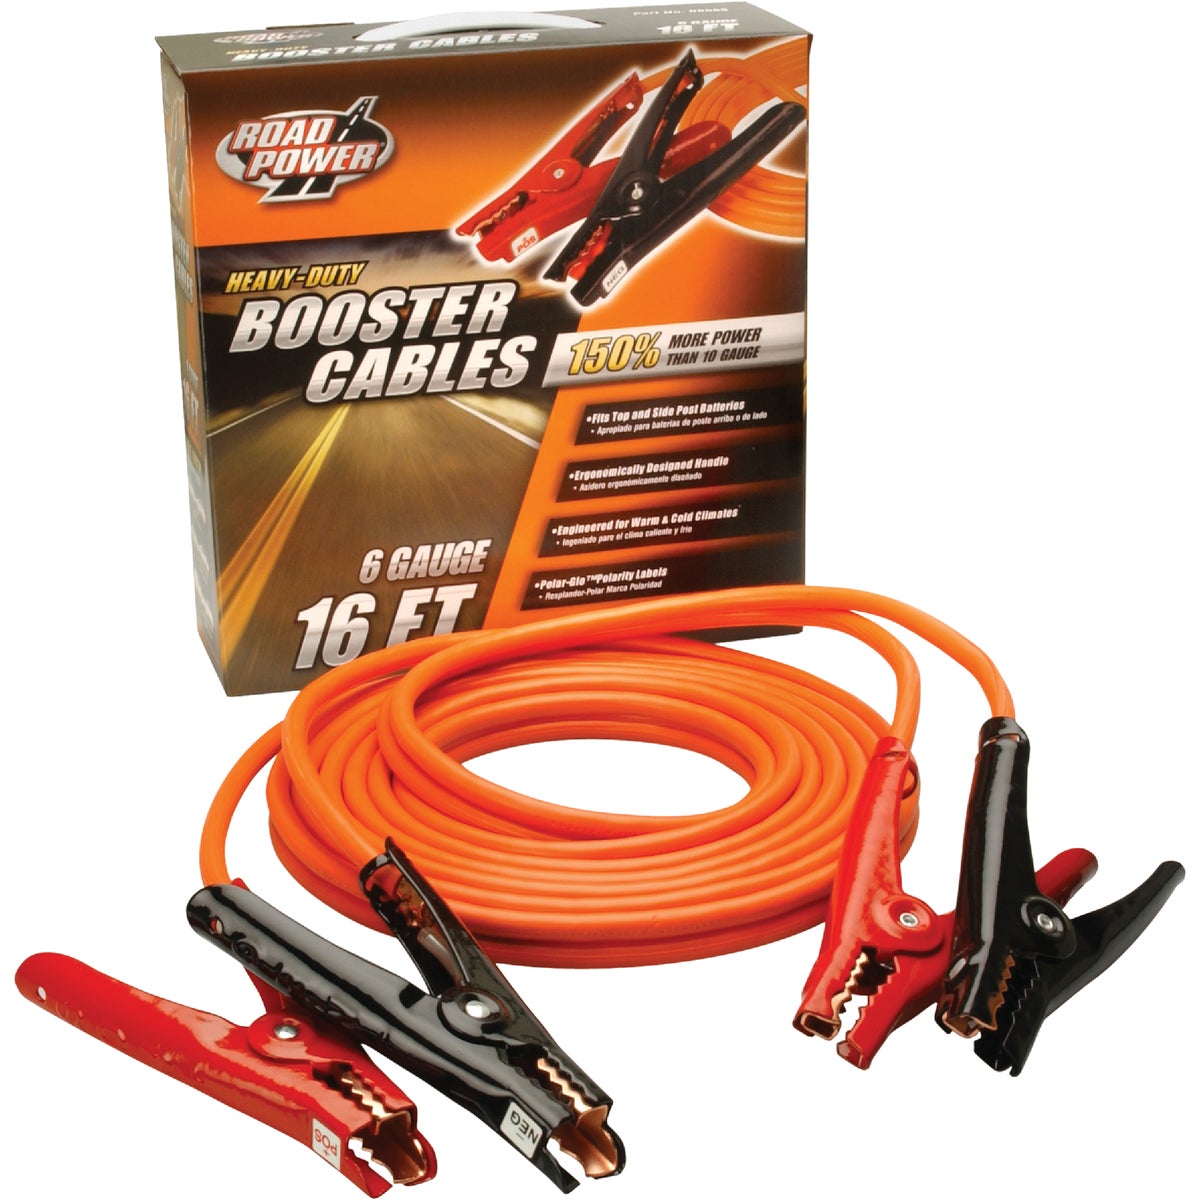 Item 580605, ROAD POWER heavy-duty booster cables feature Polar-Glo clamps and T-Prene 